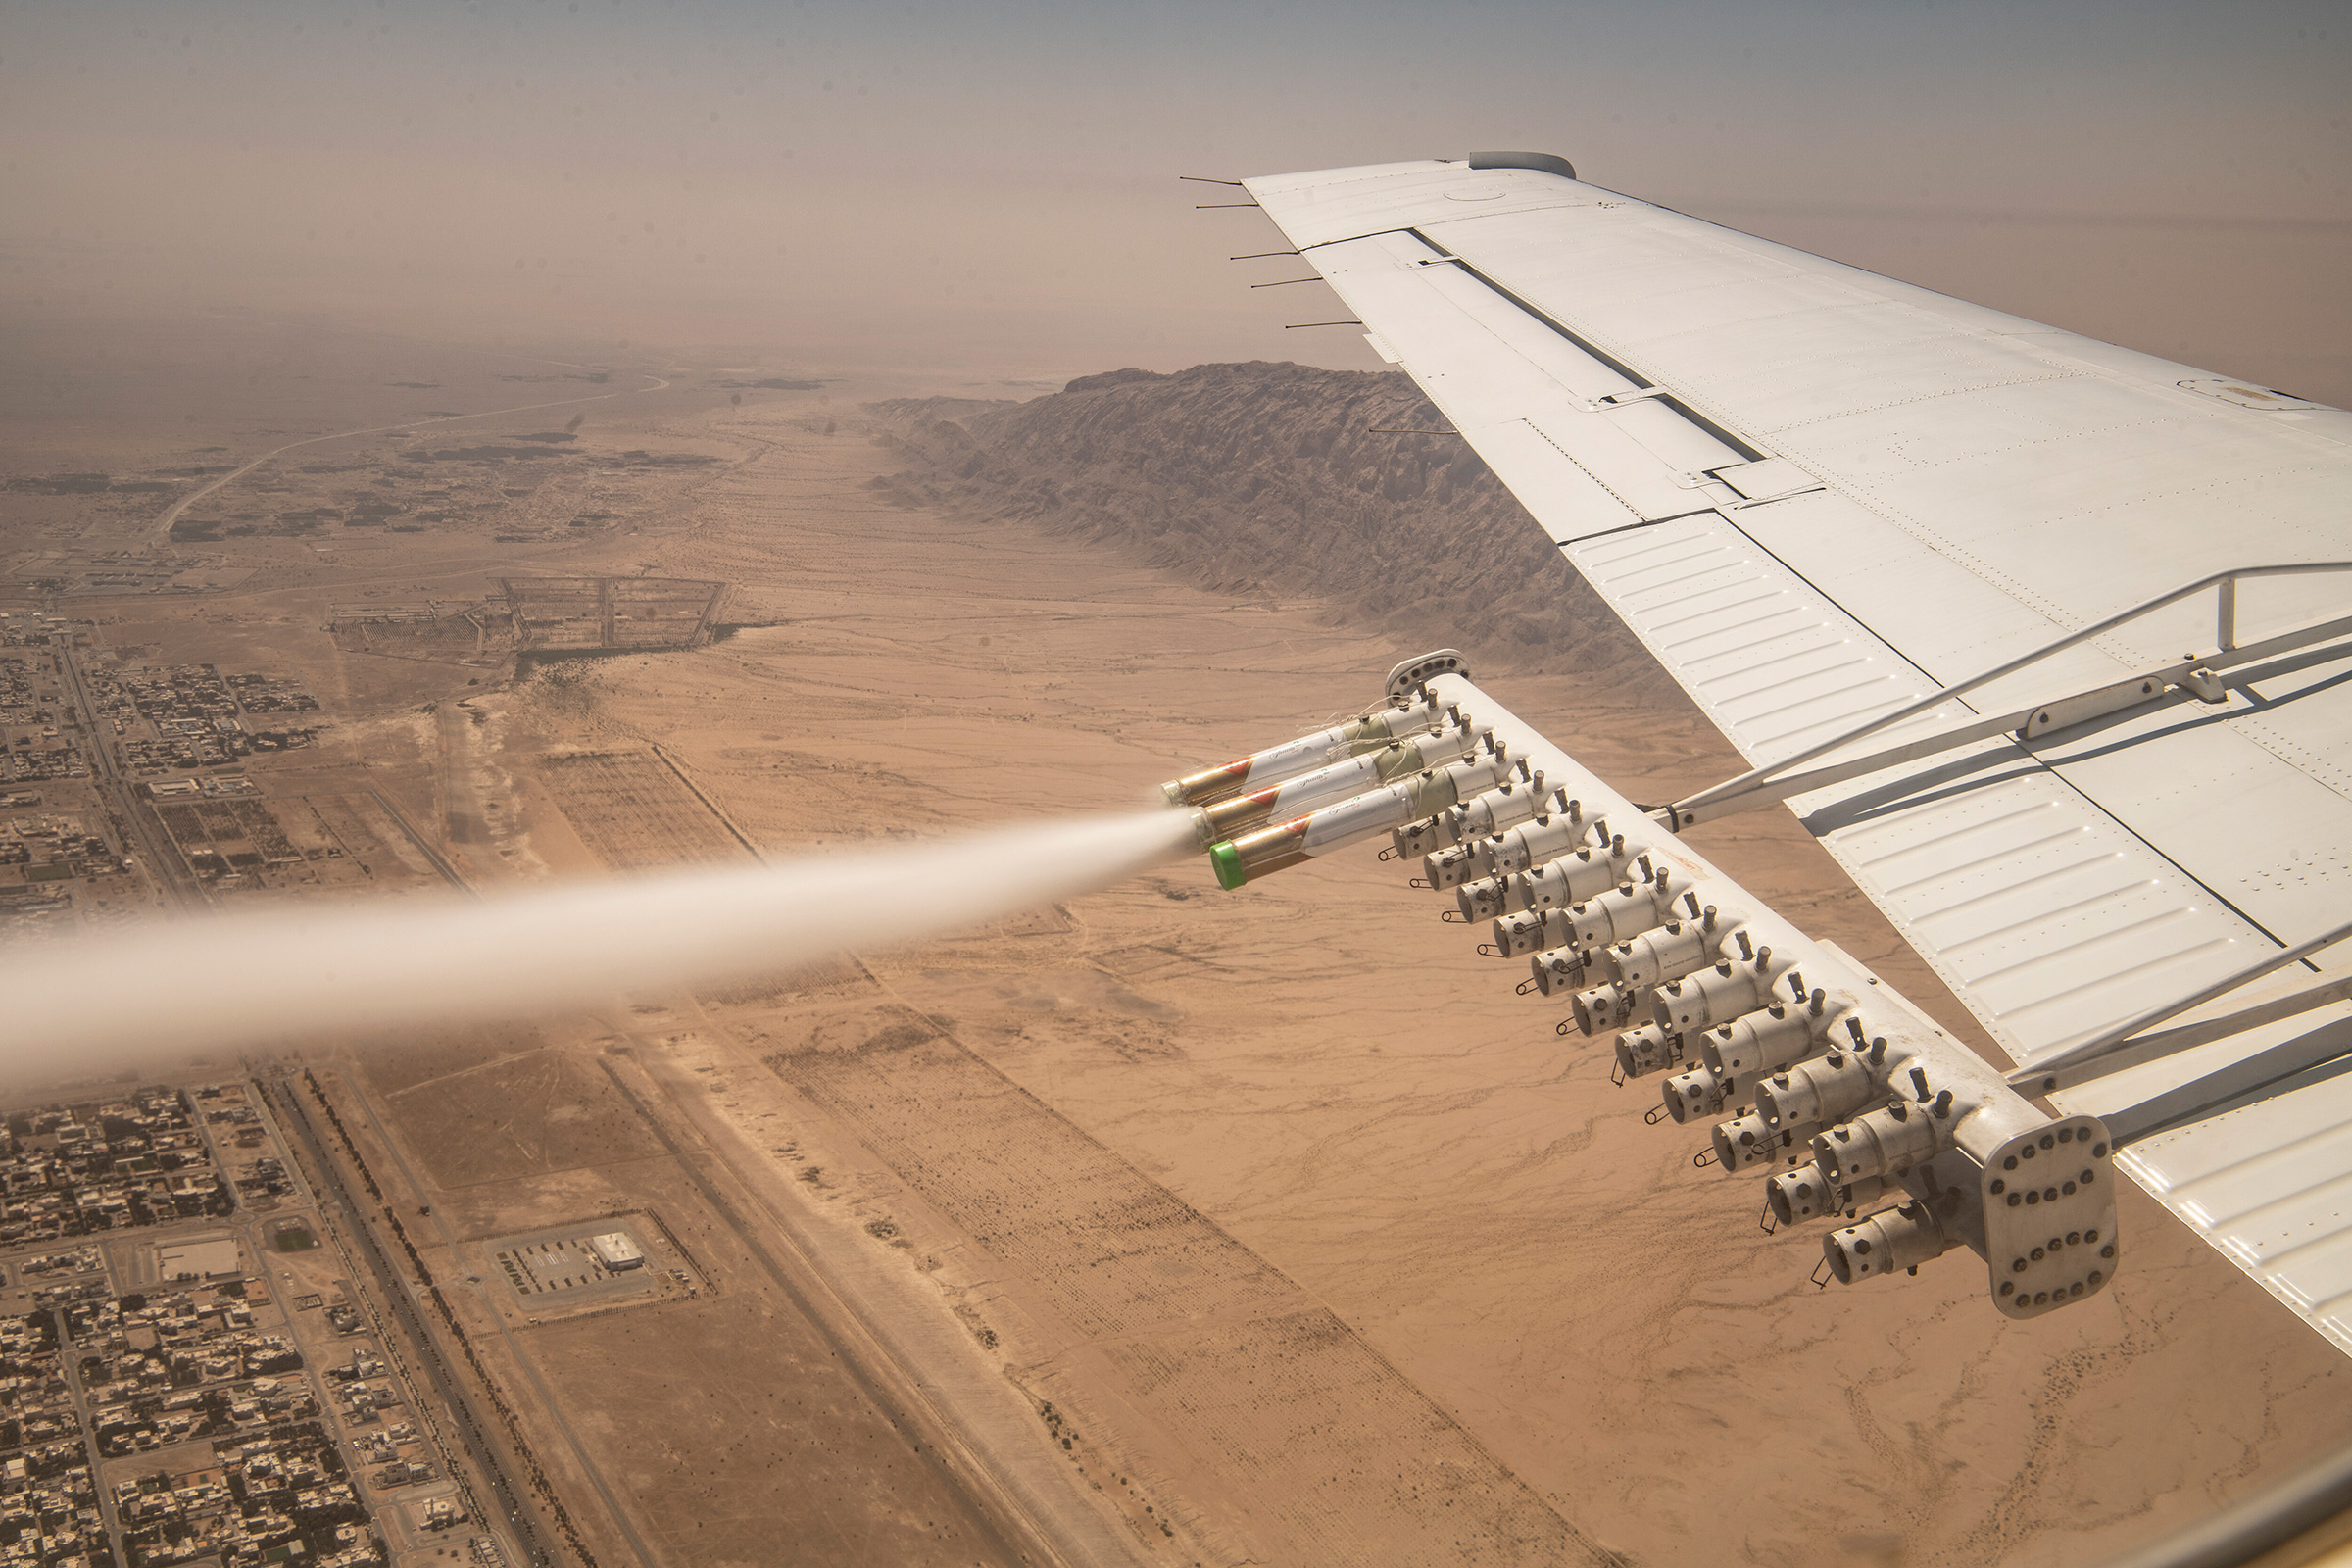 Experimental nanomaterial is released for the National Center of Meteorology and Seismology during a demonstration cloud seeding flight over in Al Ain, UAE, on March 3, 2022.